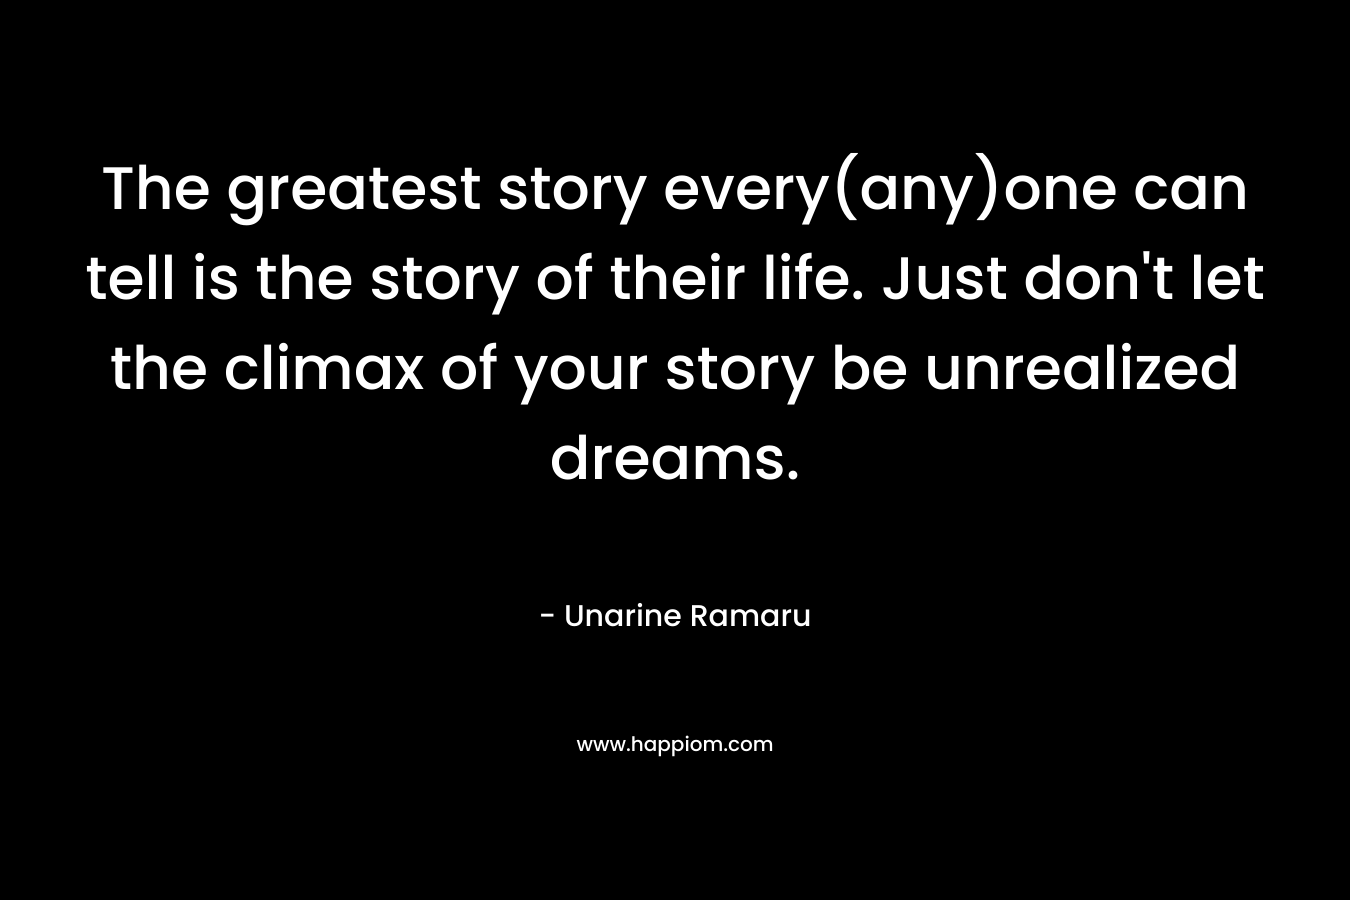 The greatest story every(any)one can tell is the story of their life. Just don't let the climax of your story be unrealized dreams.